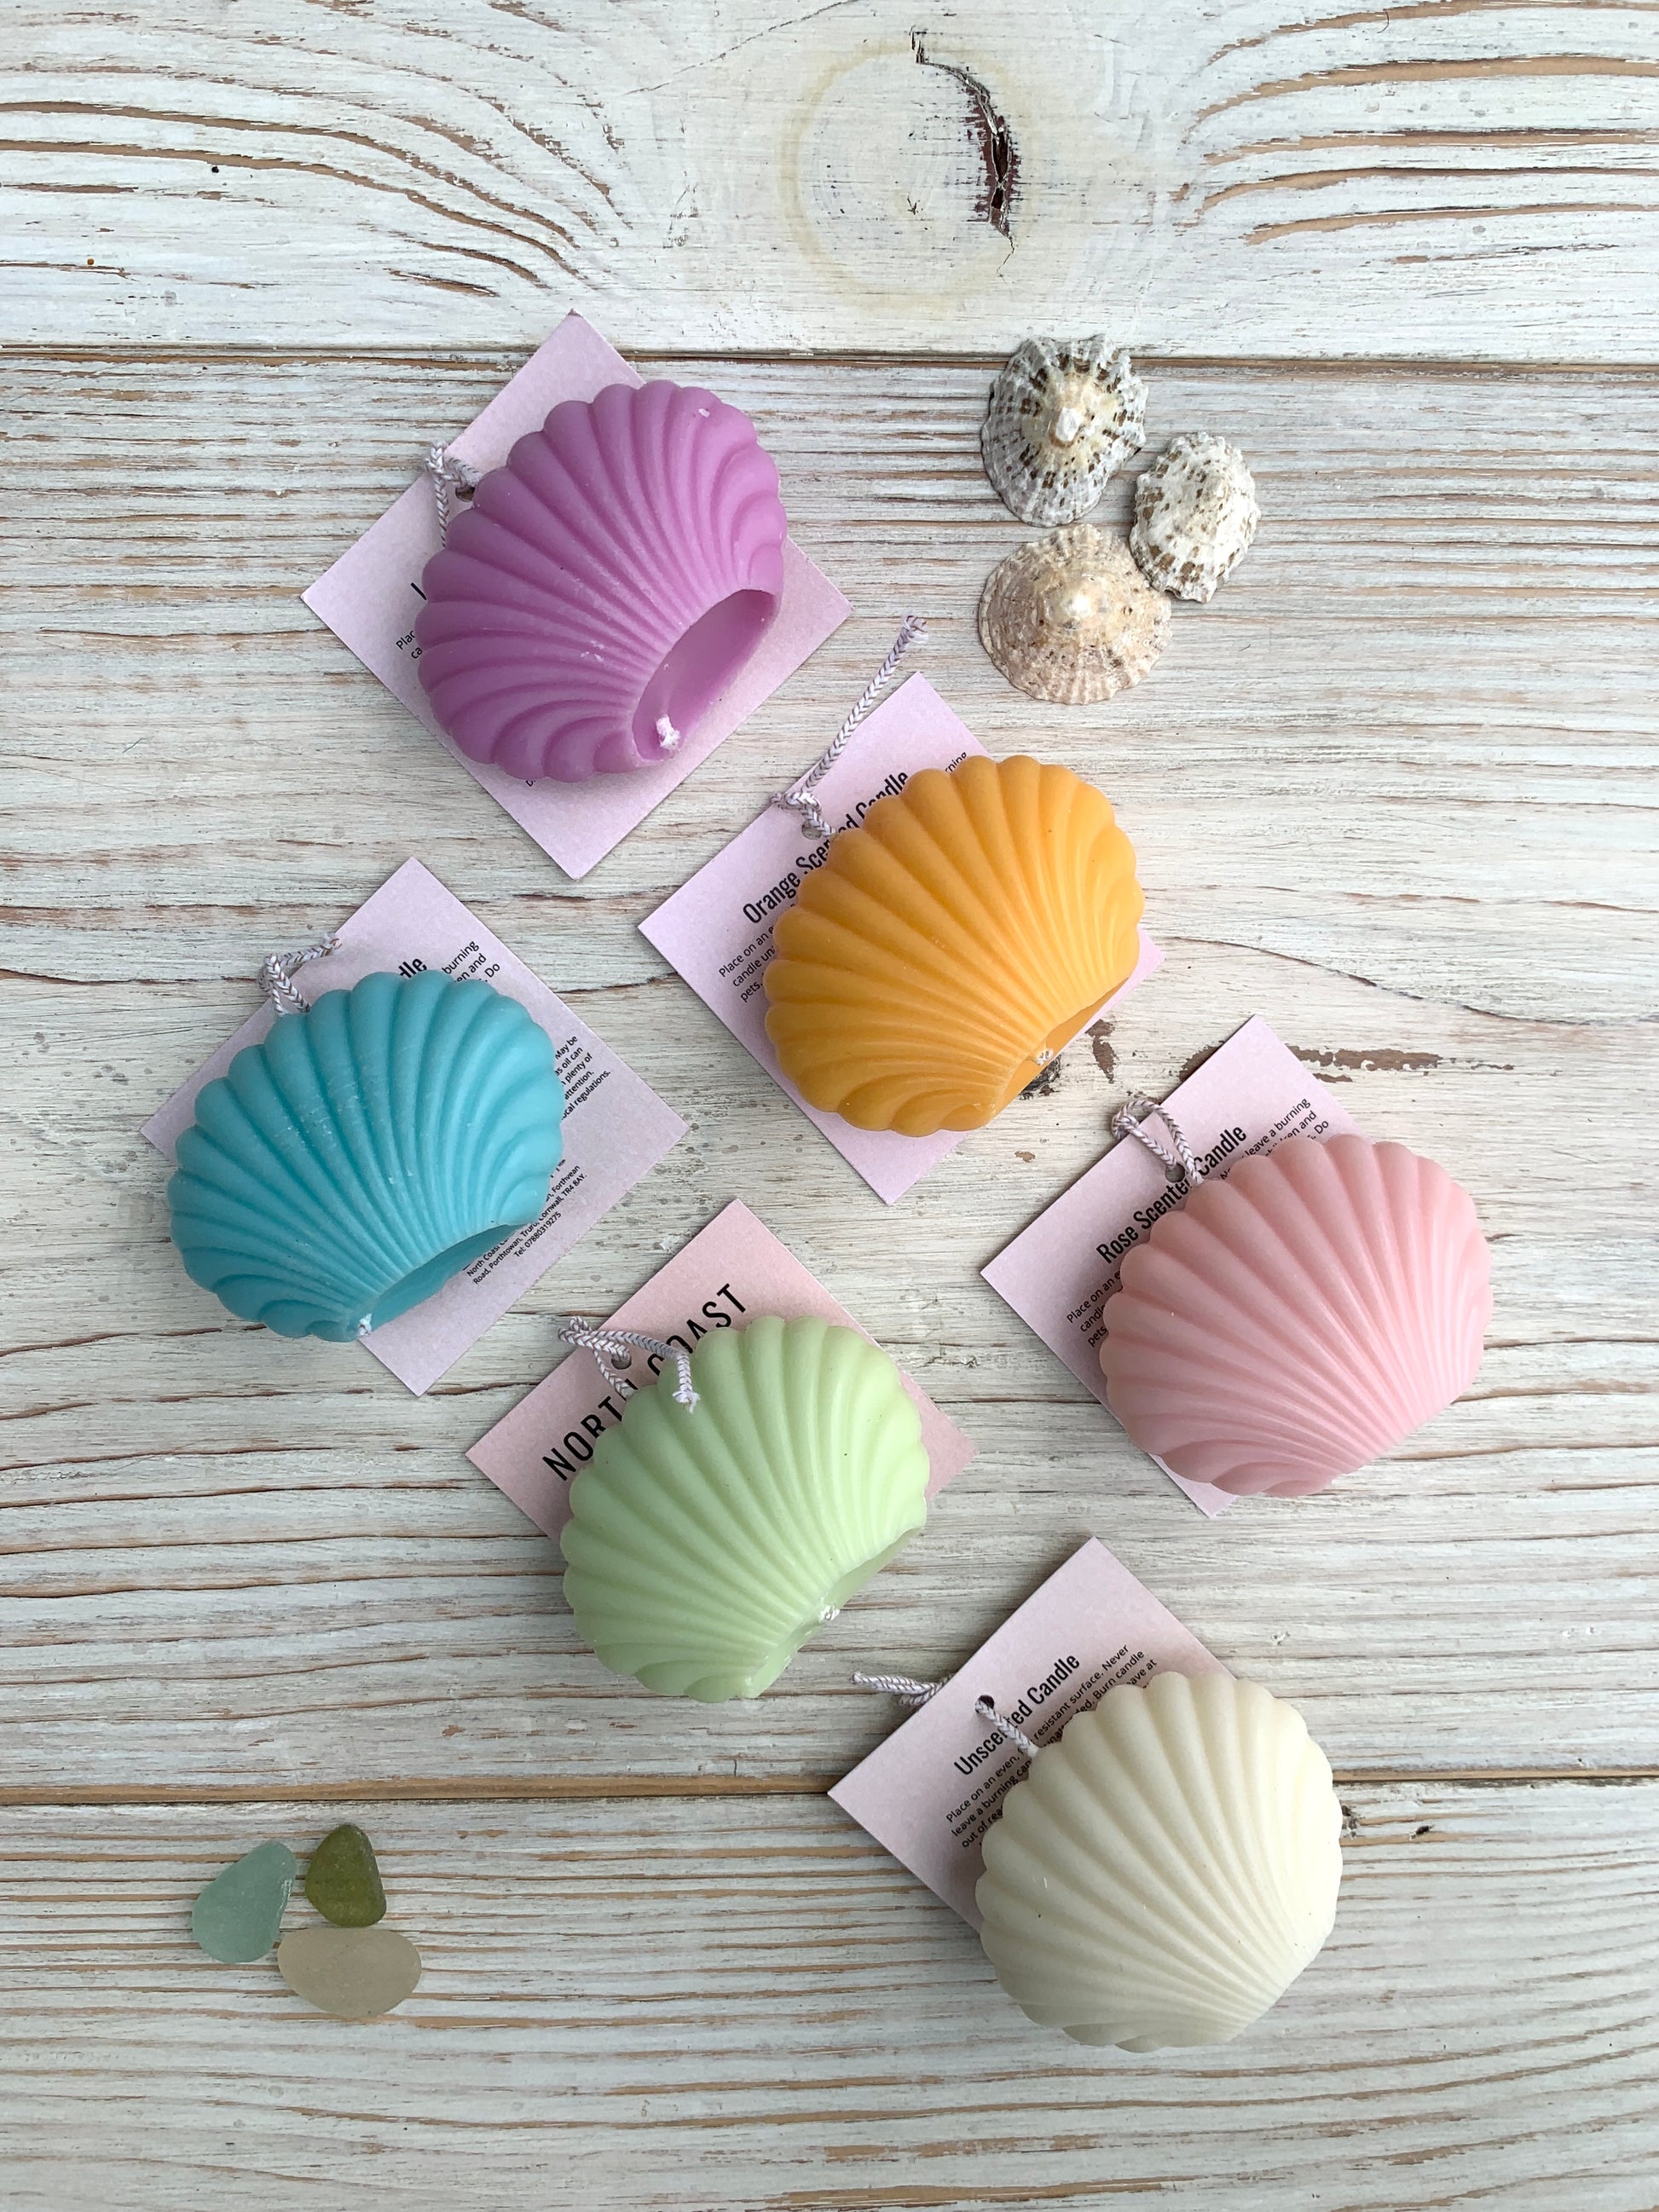 Handpoured coloured baby shell candles